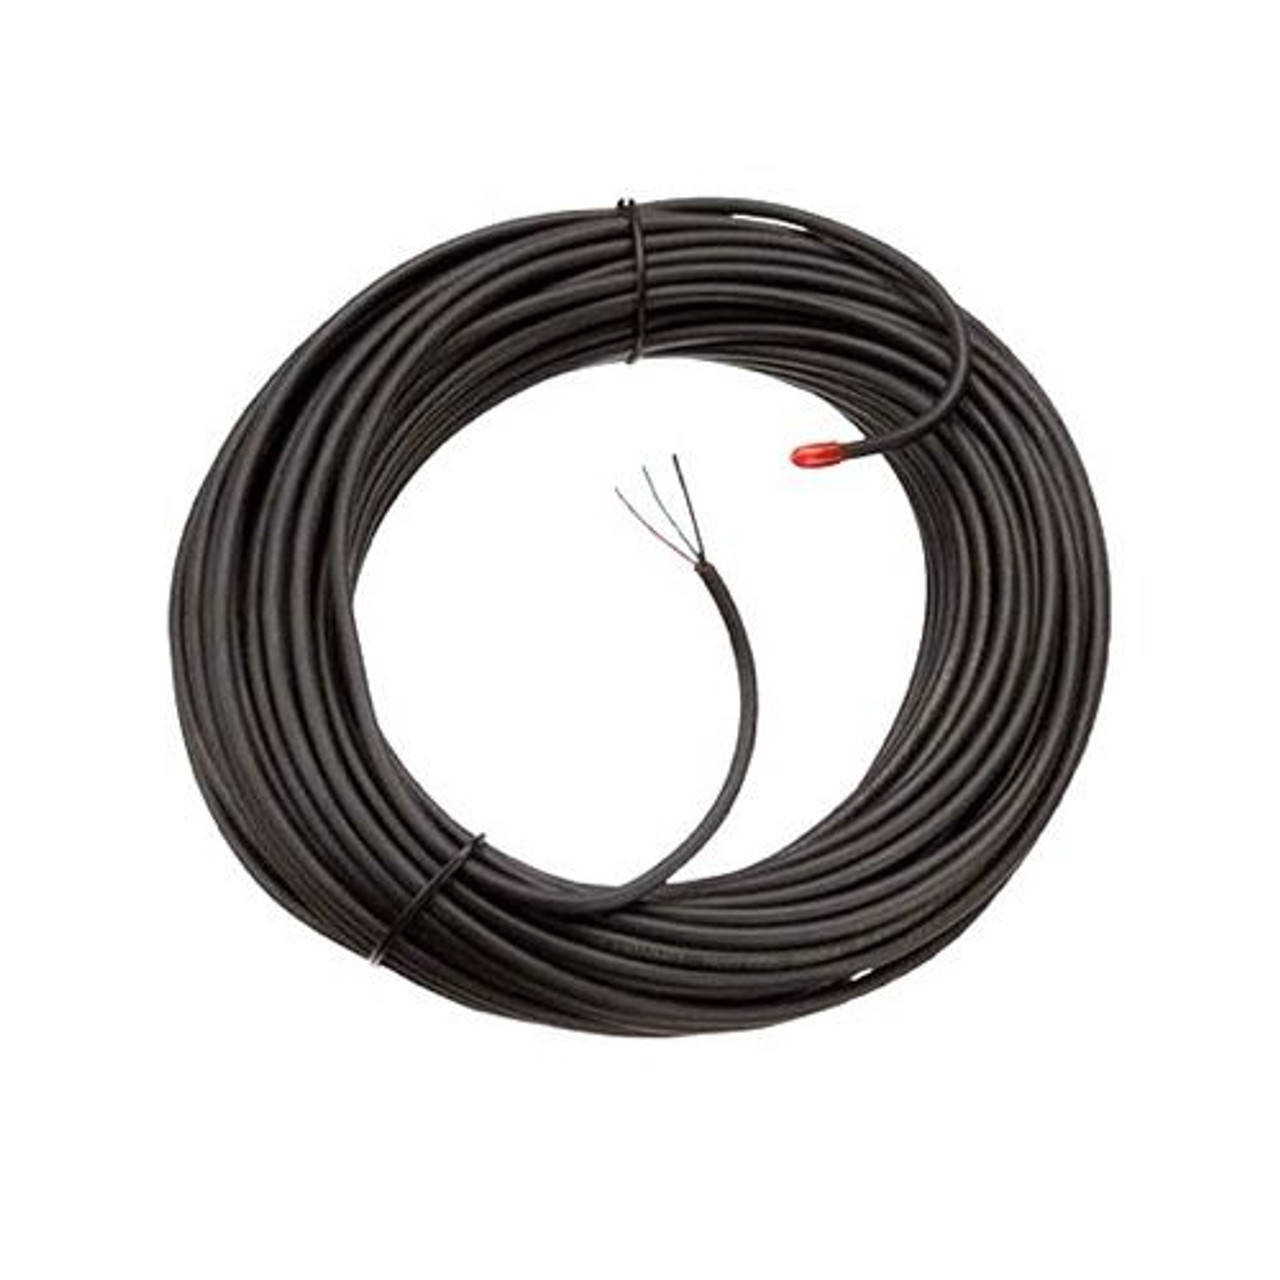 Channel Master 9554 75' FT Antenna Rotor Control Cable 3 Conductor 22 AWG Wire Round Rotator 22 Gauge TV Rotator Cable for CM9521